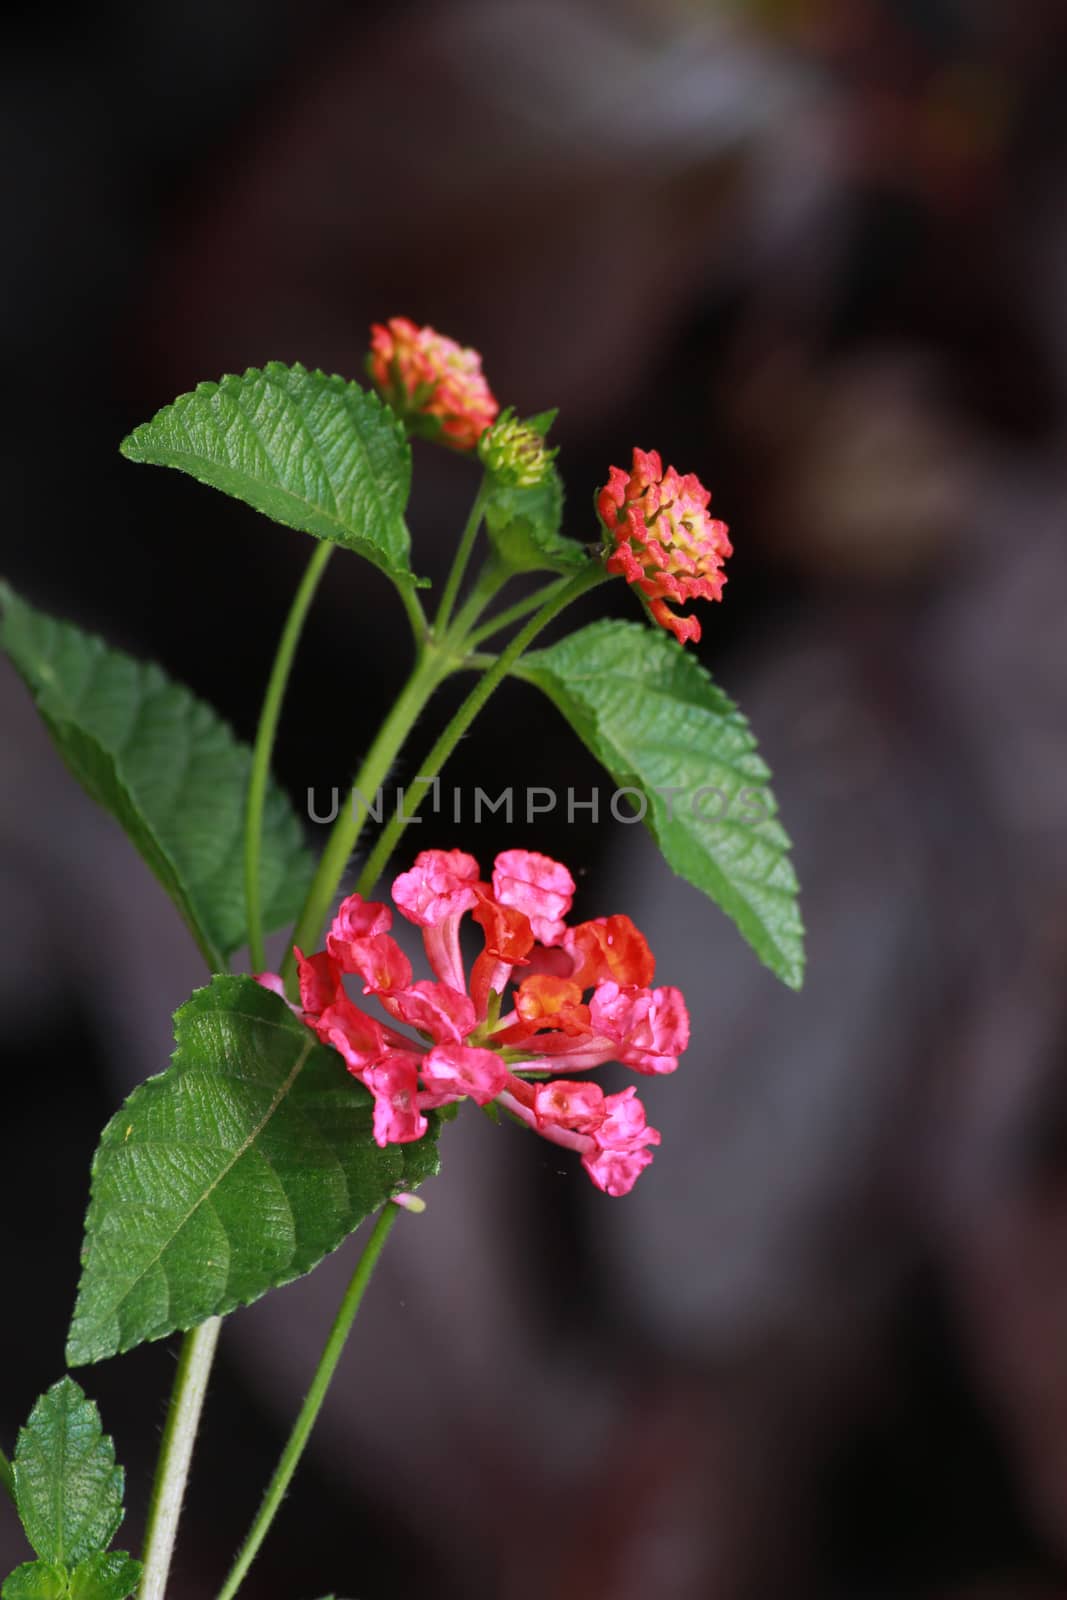 The branch of  lantana flower.It is the pink bunch.